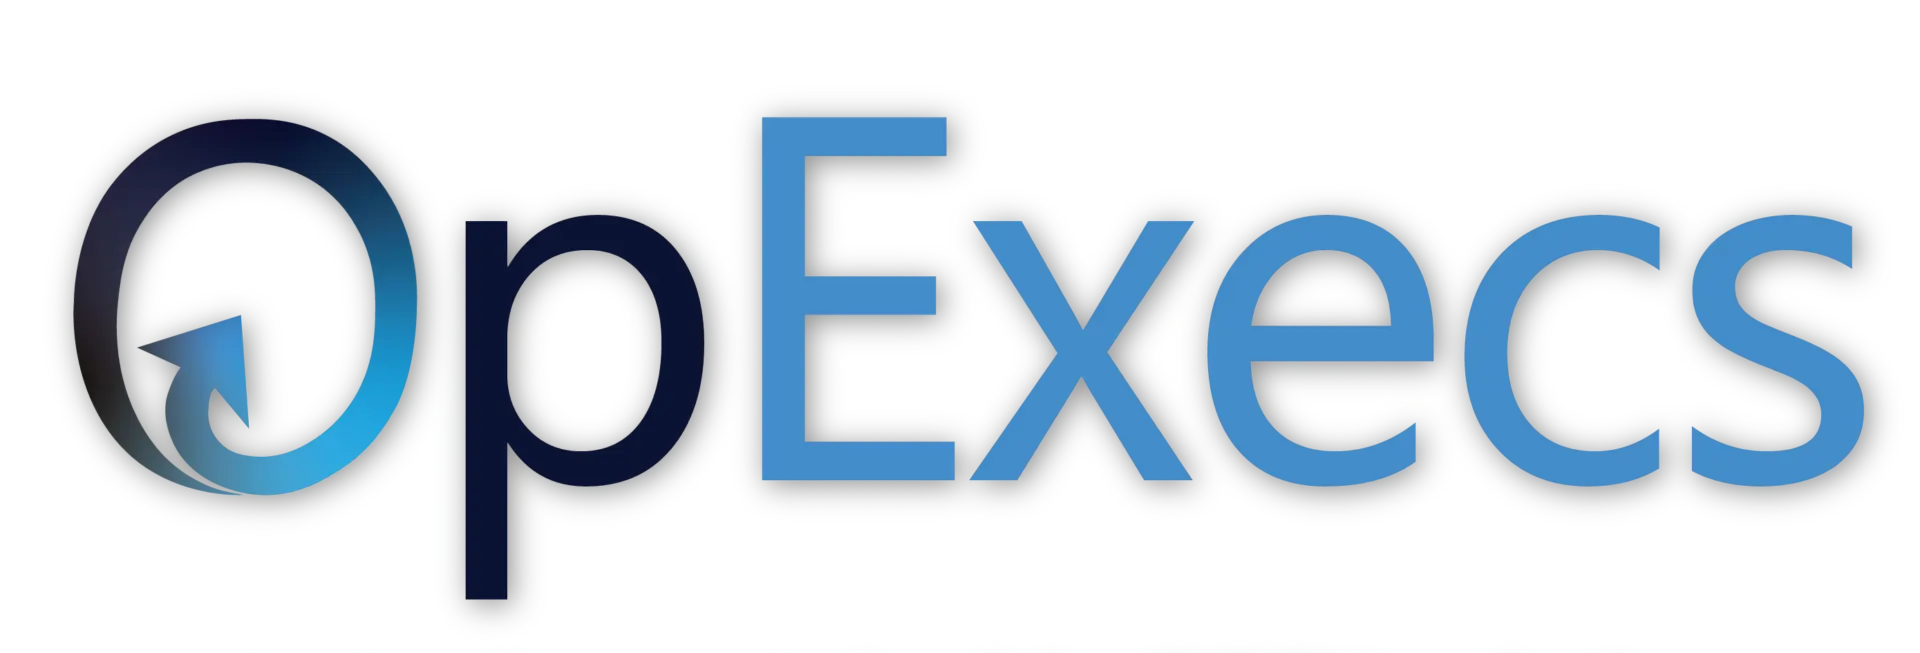 The logo for opexes on a black background.